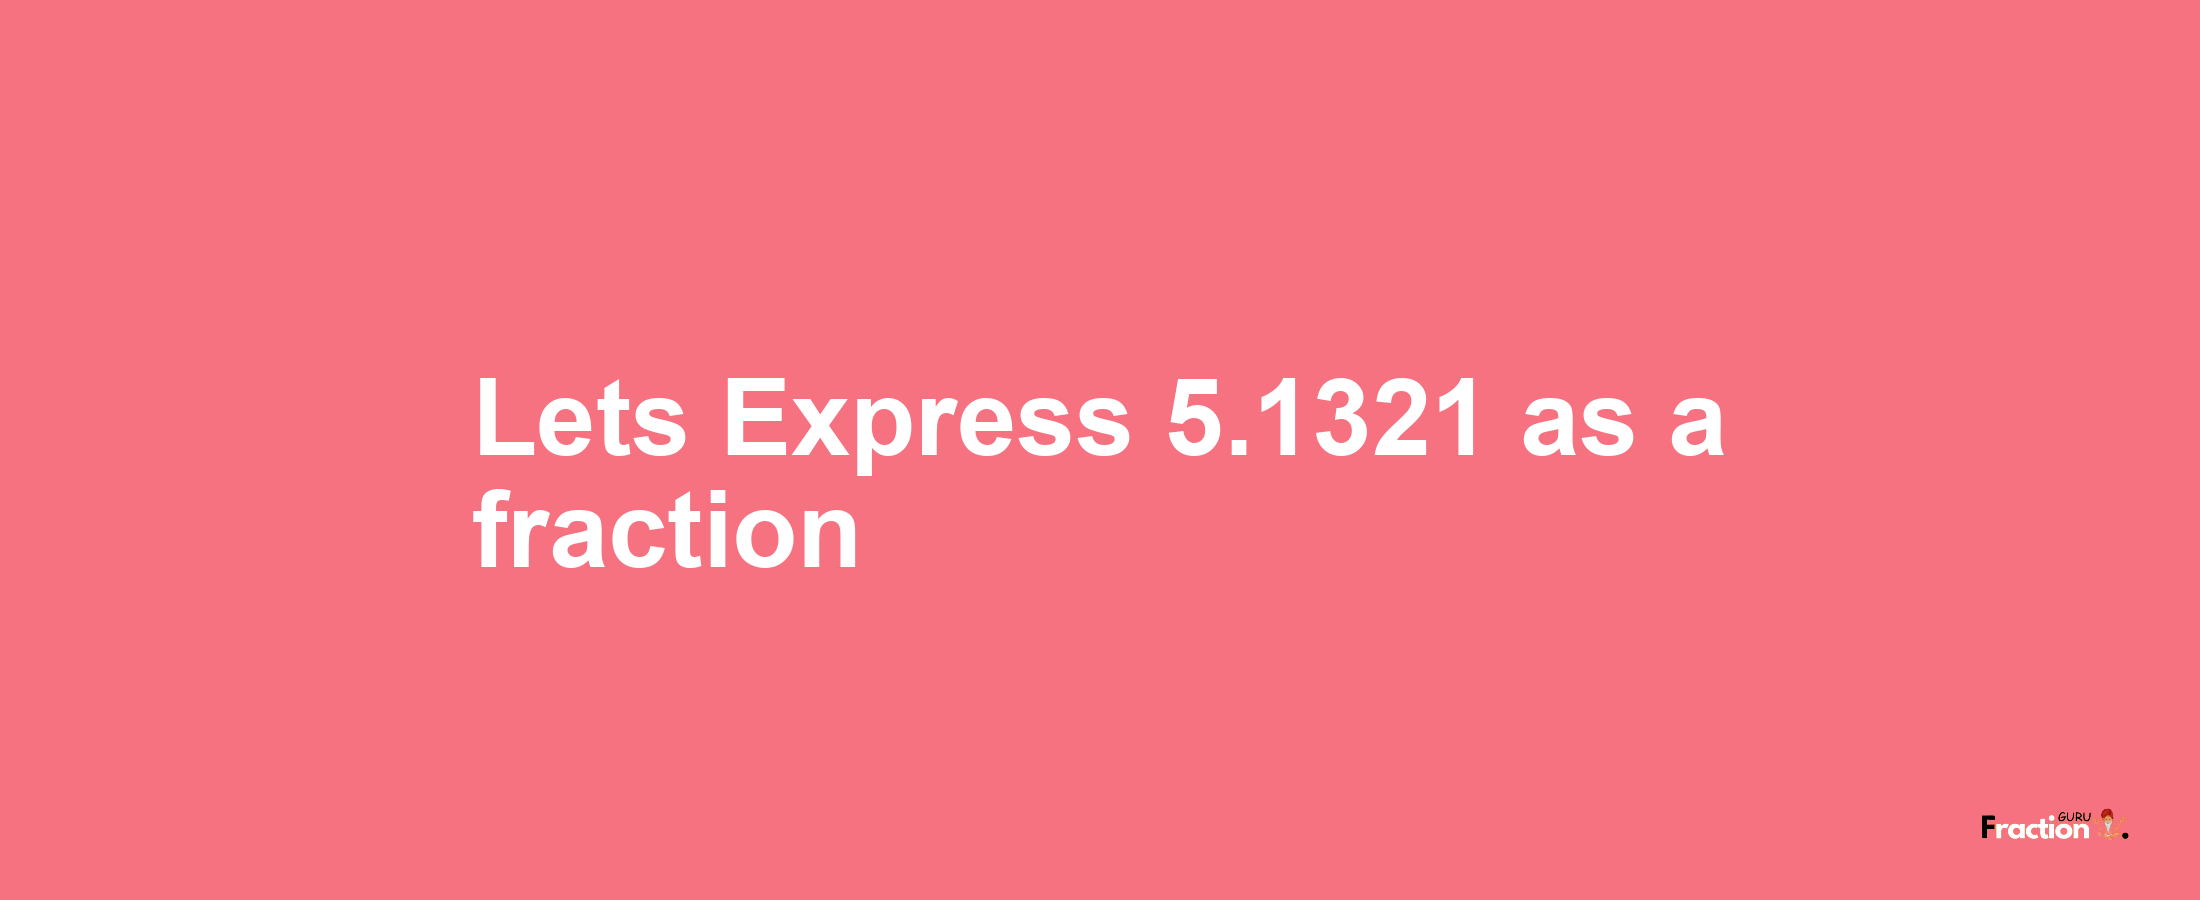 Lets Express 5.1321 as afraction